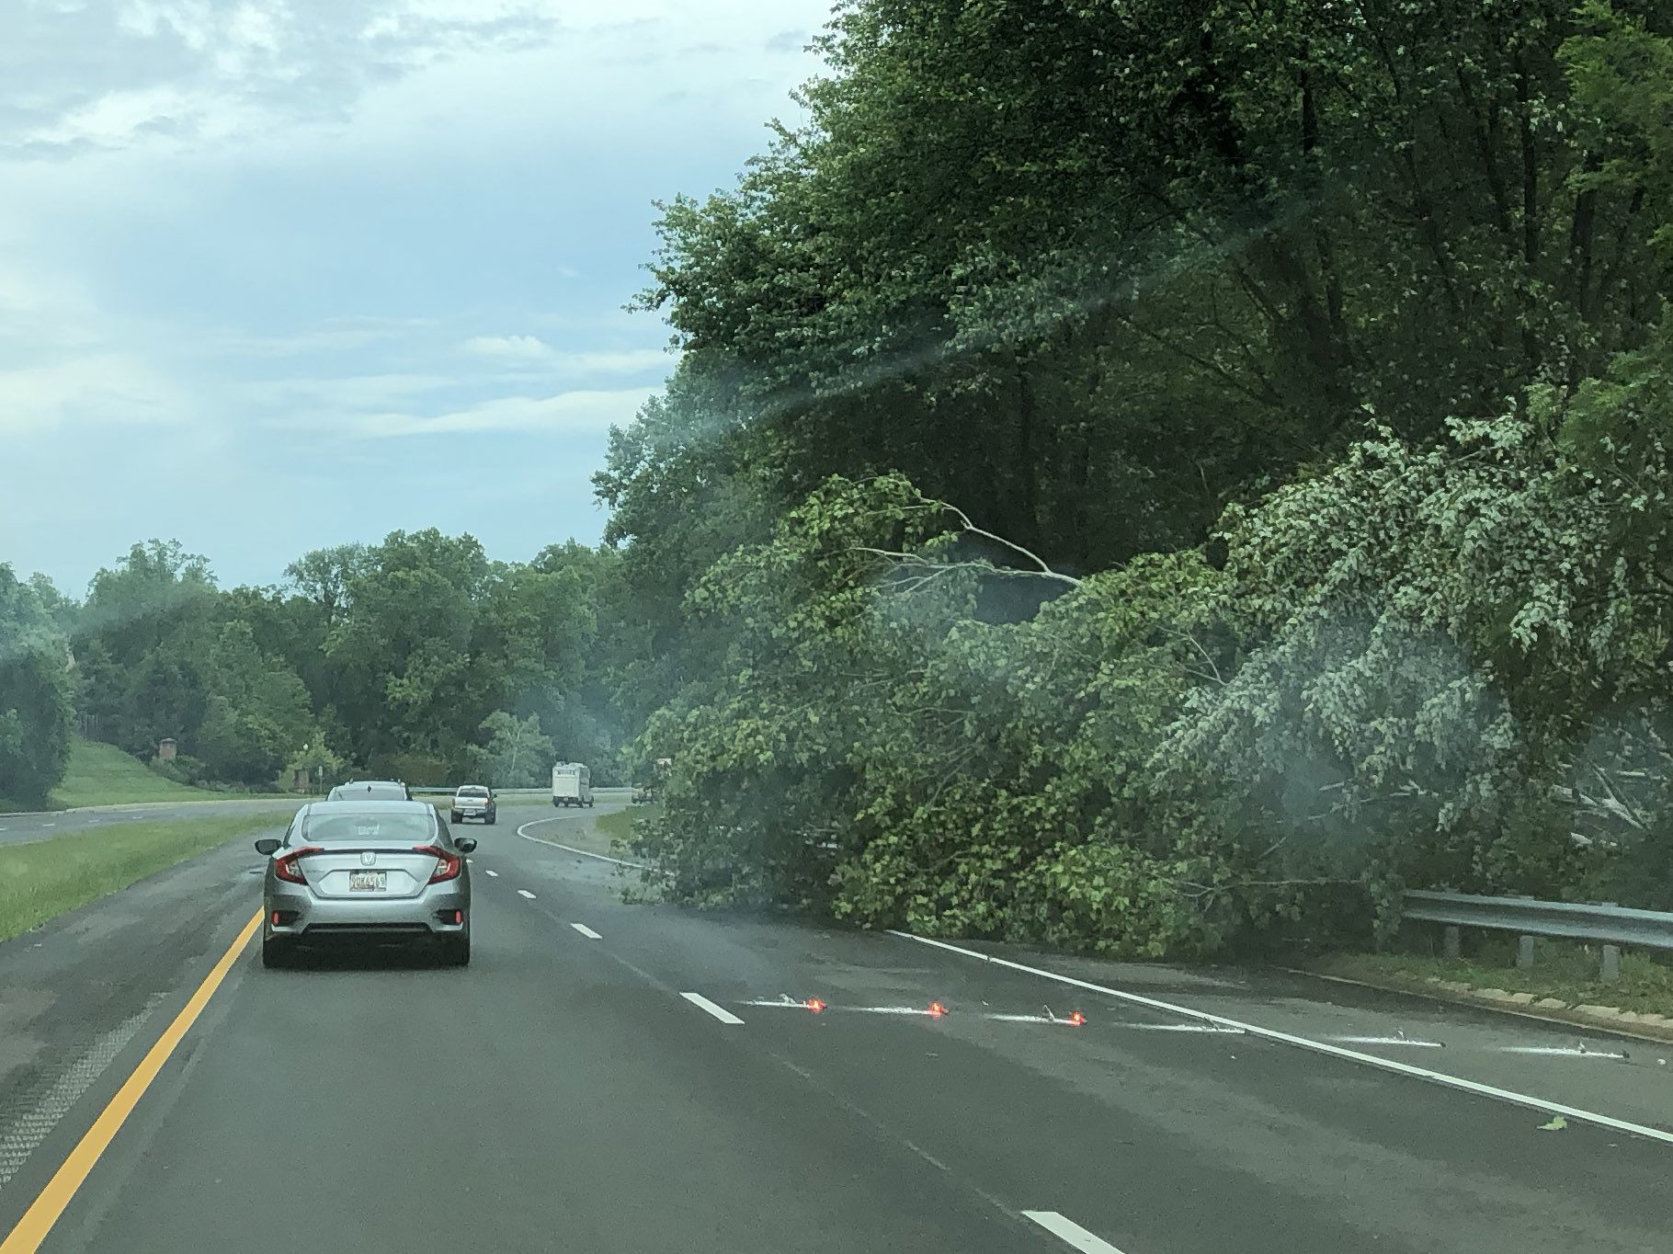 The storm may be over, but a downed tree blocks a lane on the Midcounty Highway in Gaithersburg, Maryland. (WTOP/Mike Murillo)